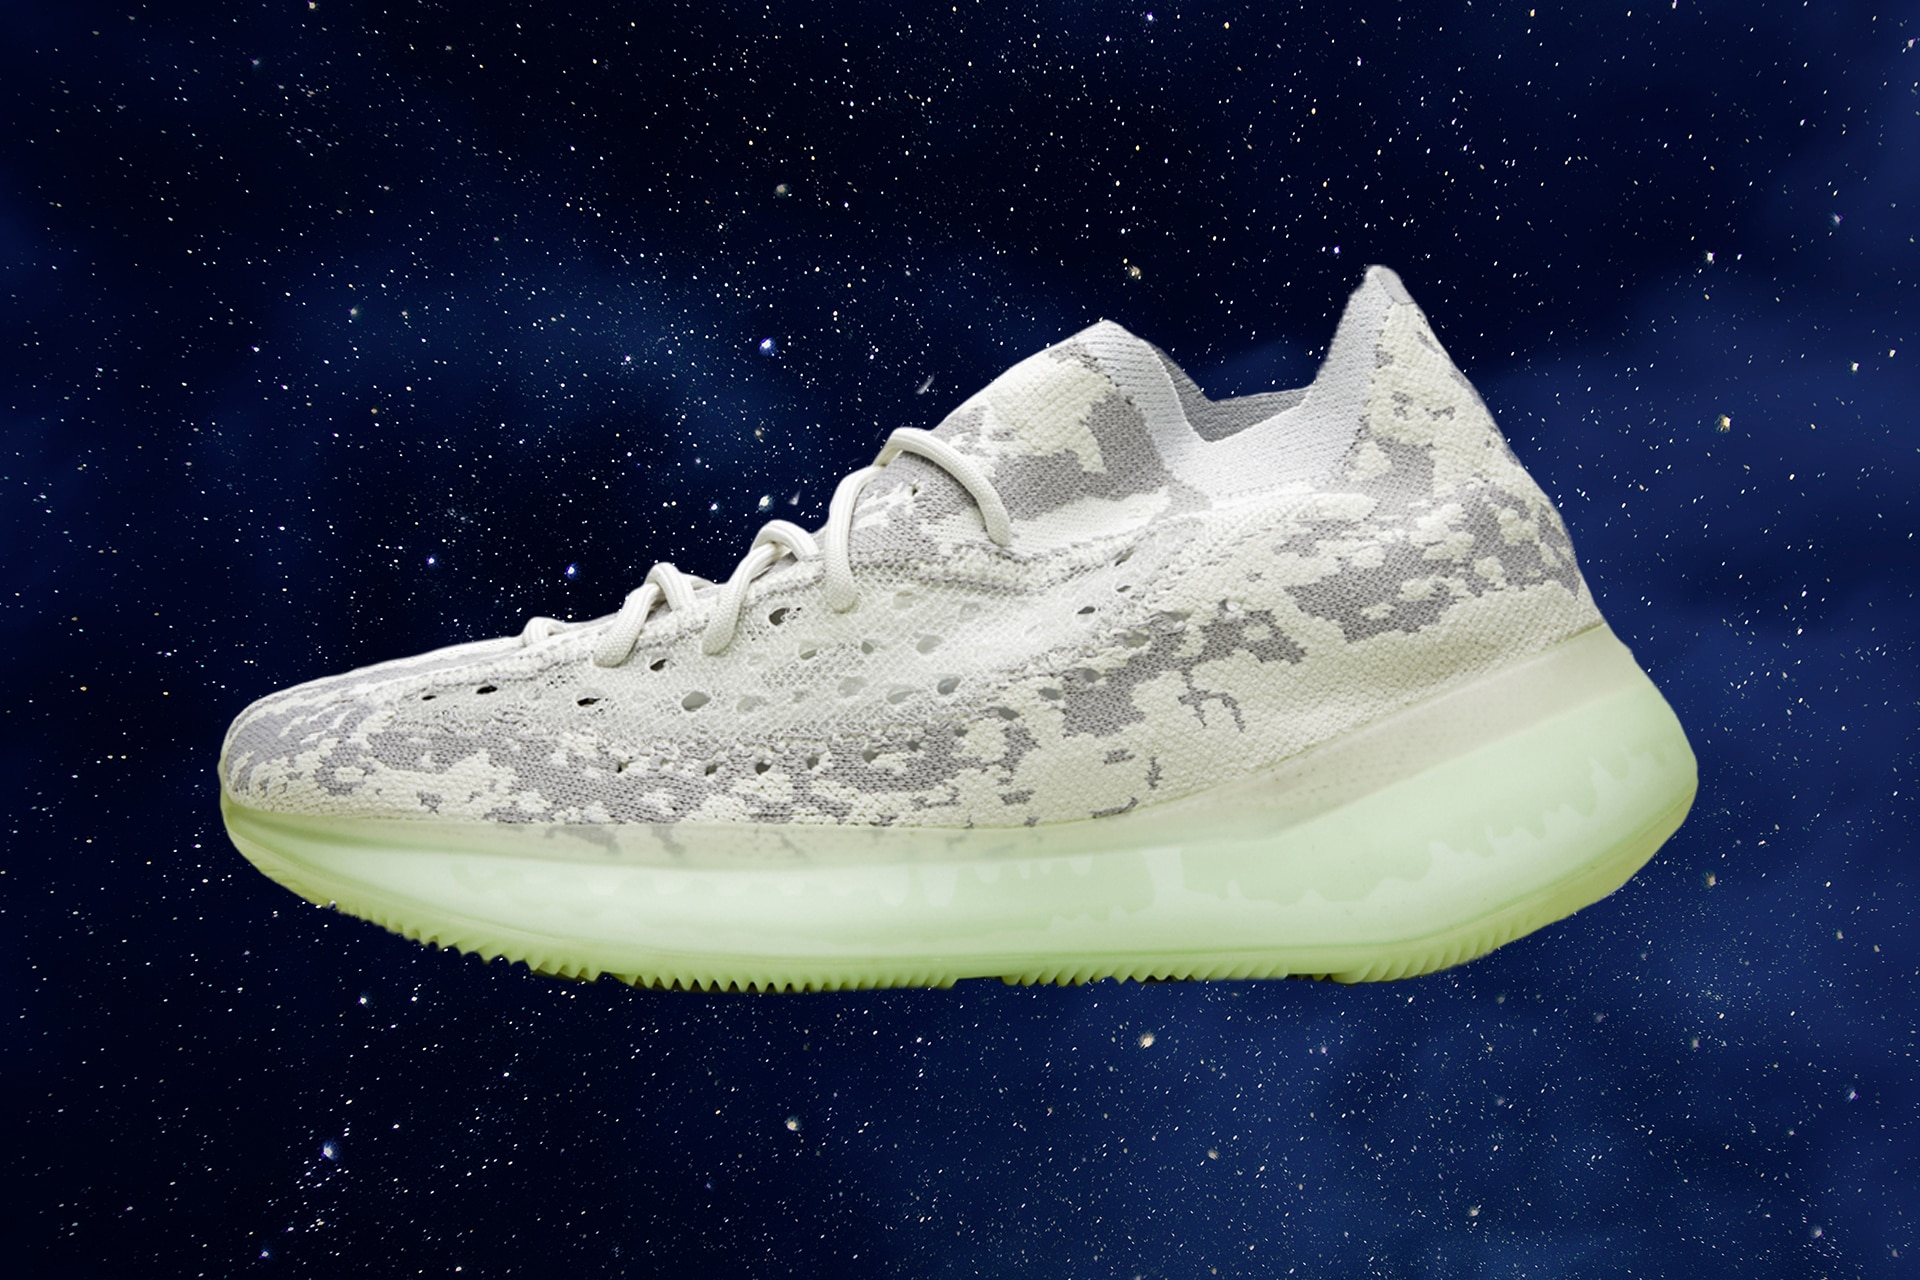 yeezy space shoes